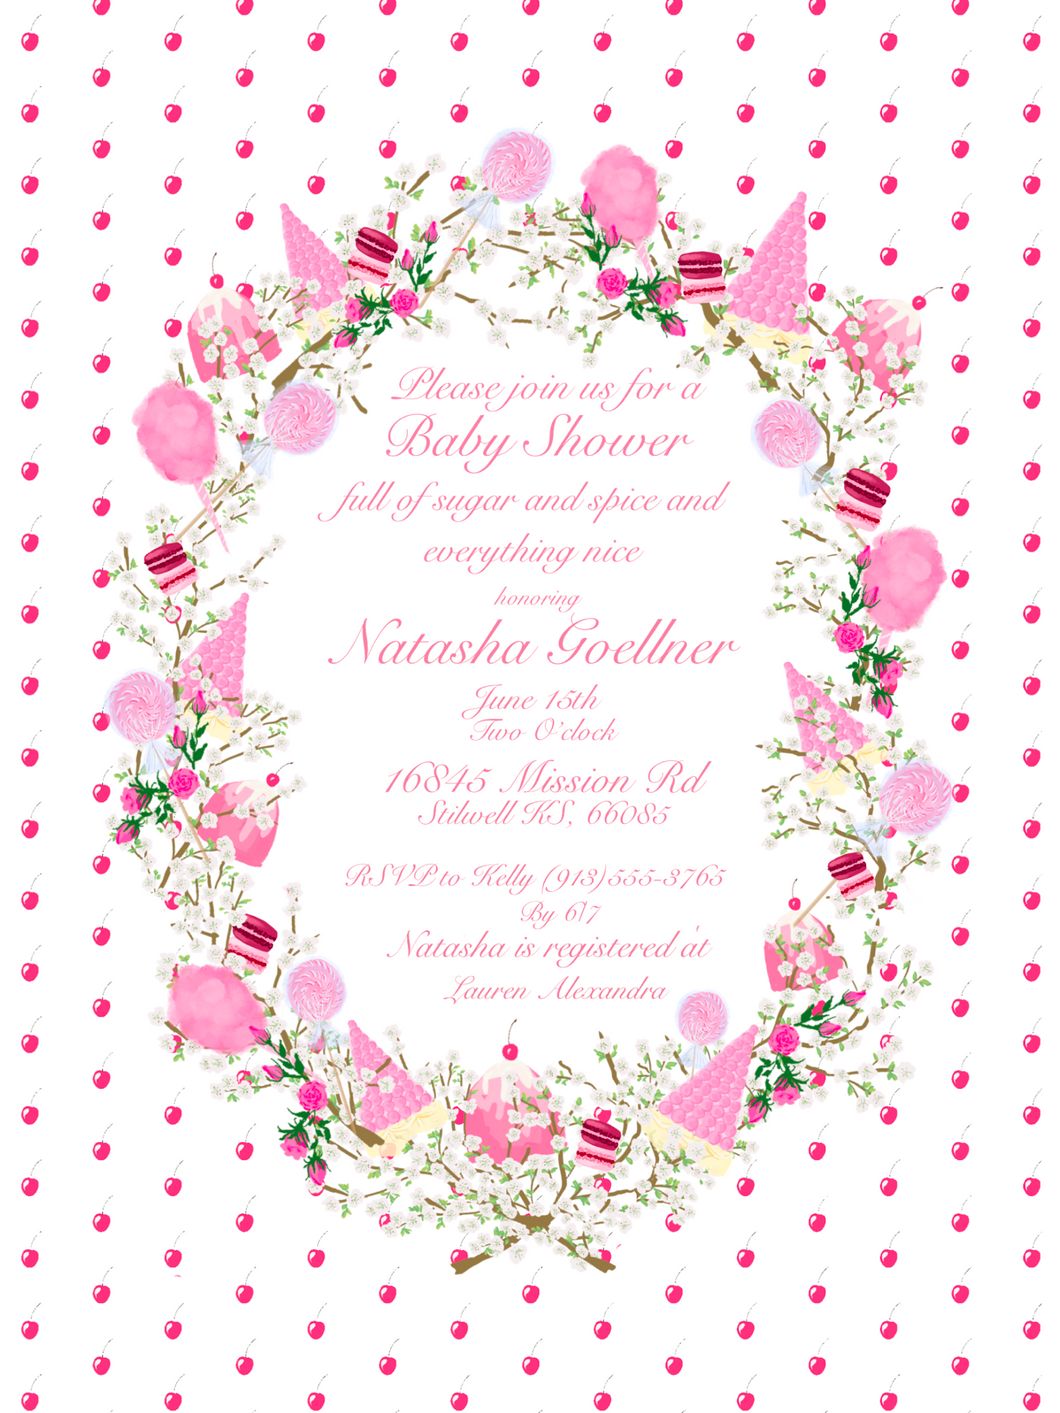 Sugar and Spice and Everything Nice Baby Shower Invitations